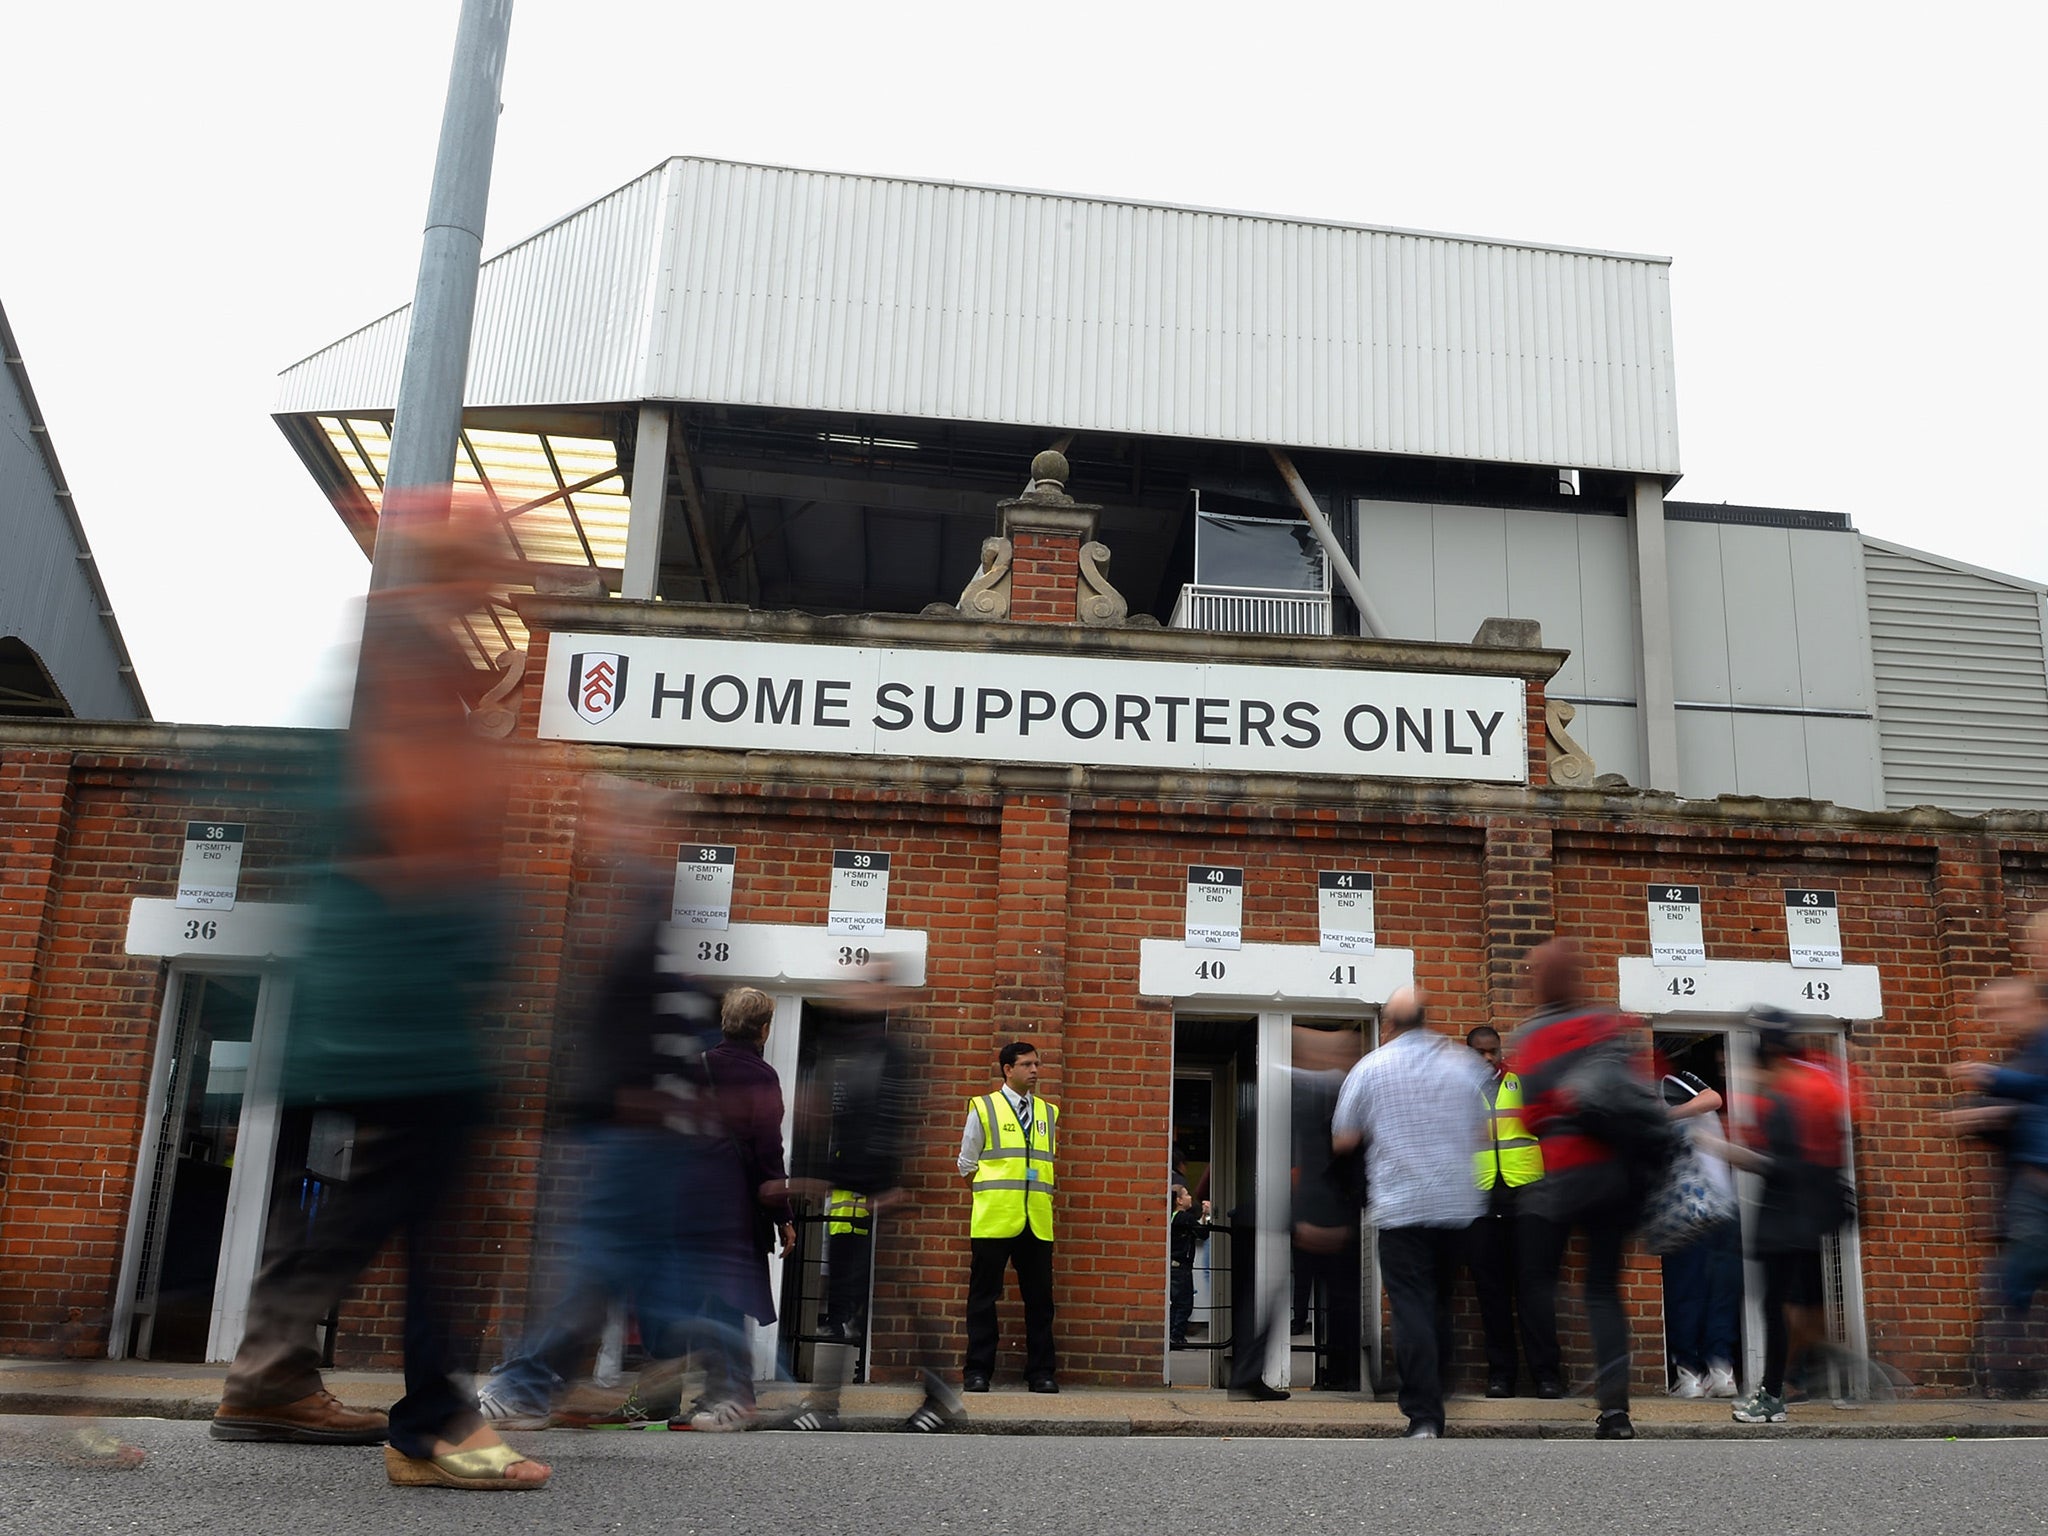 Fulham supporters travelling by train face a rush to make kick-off